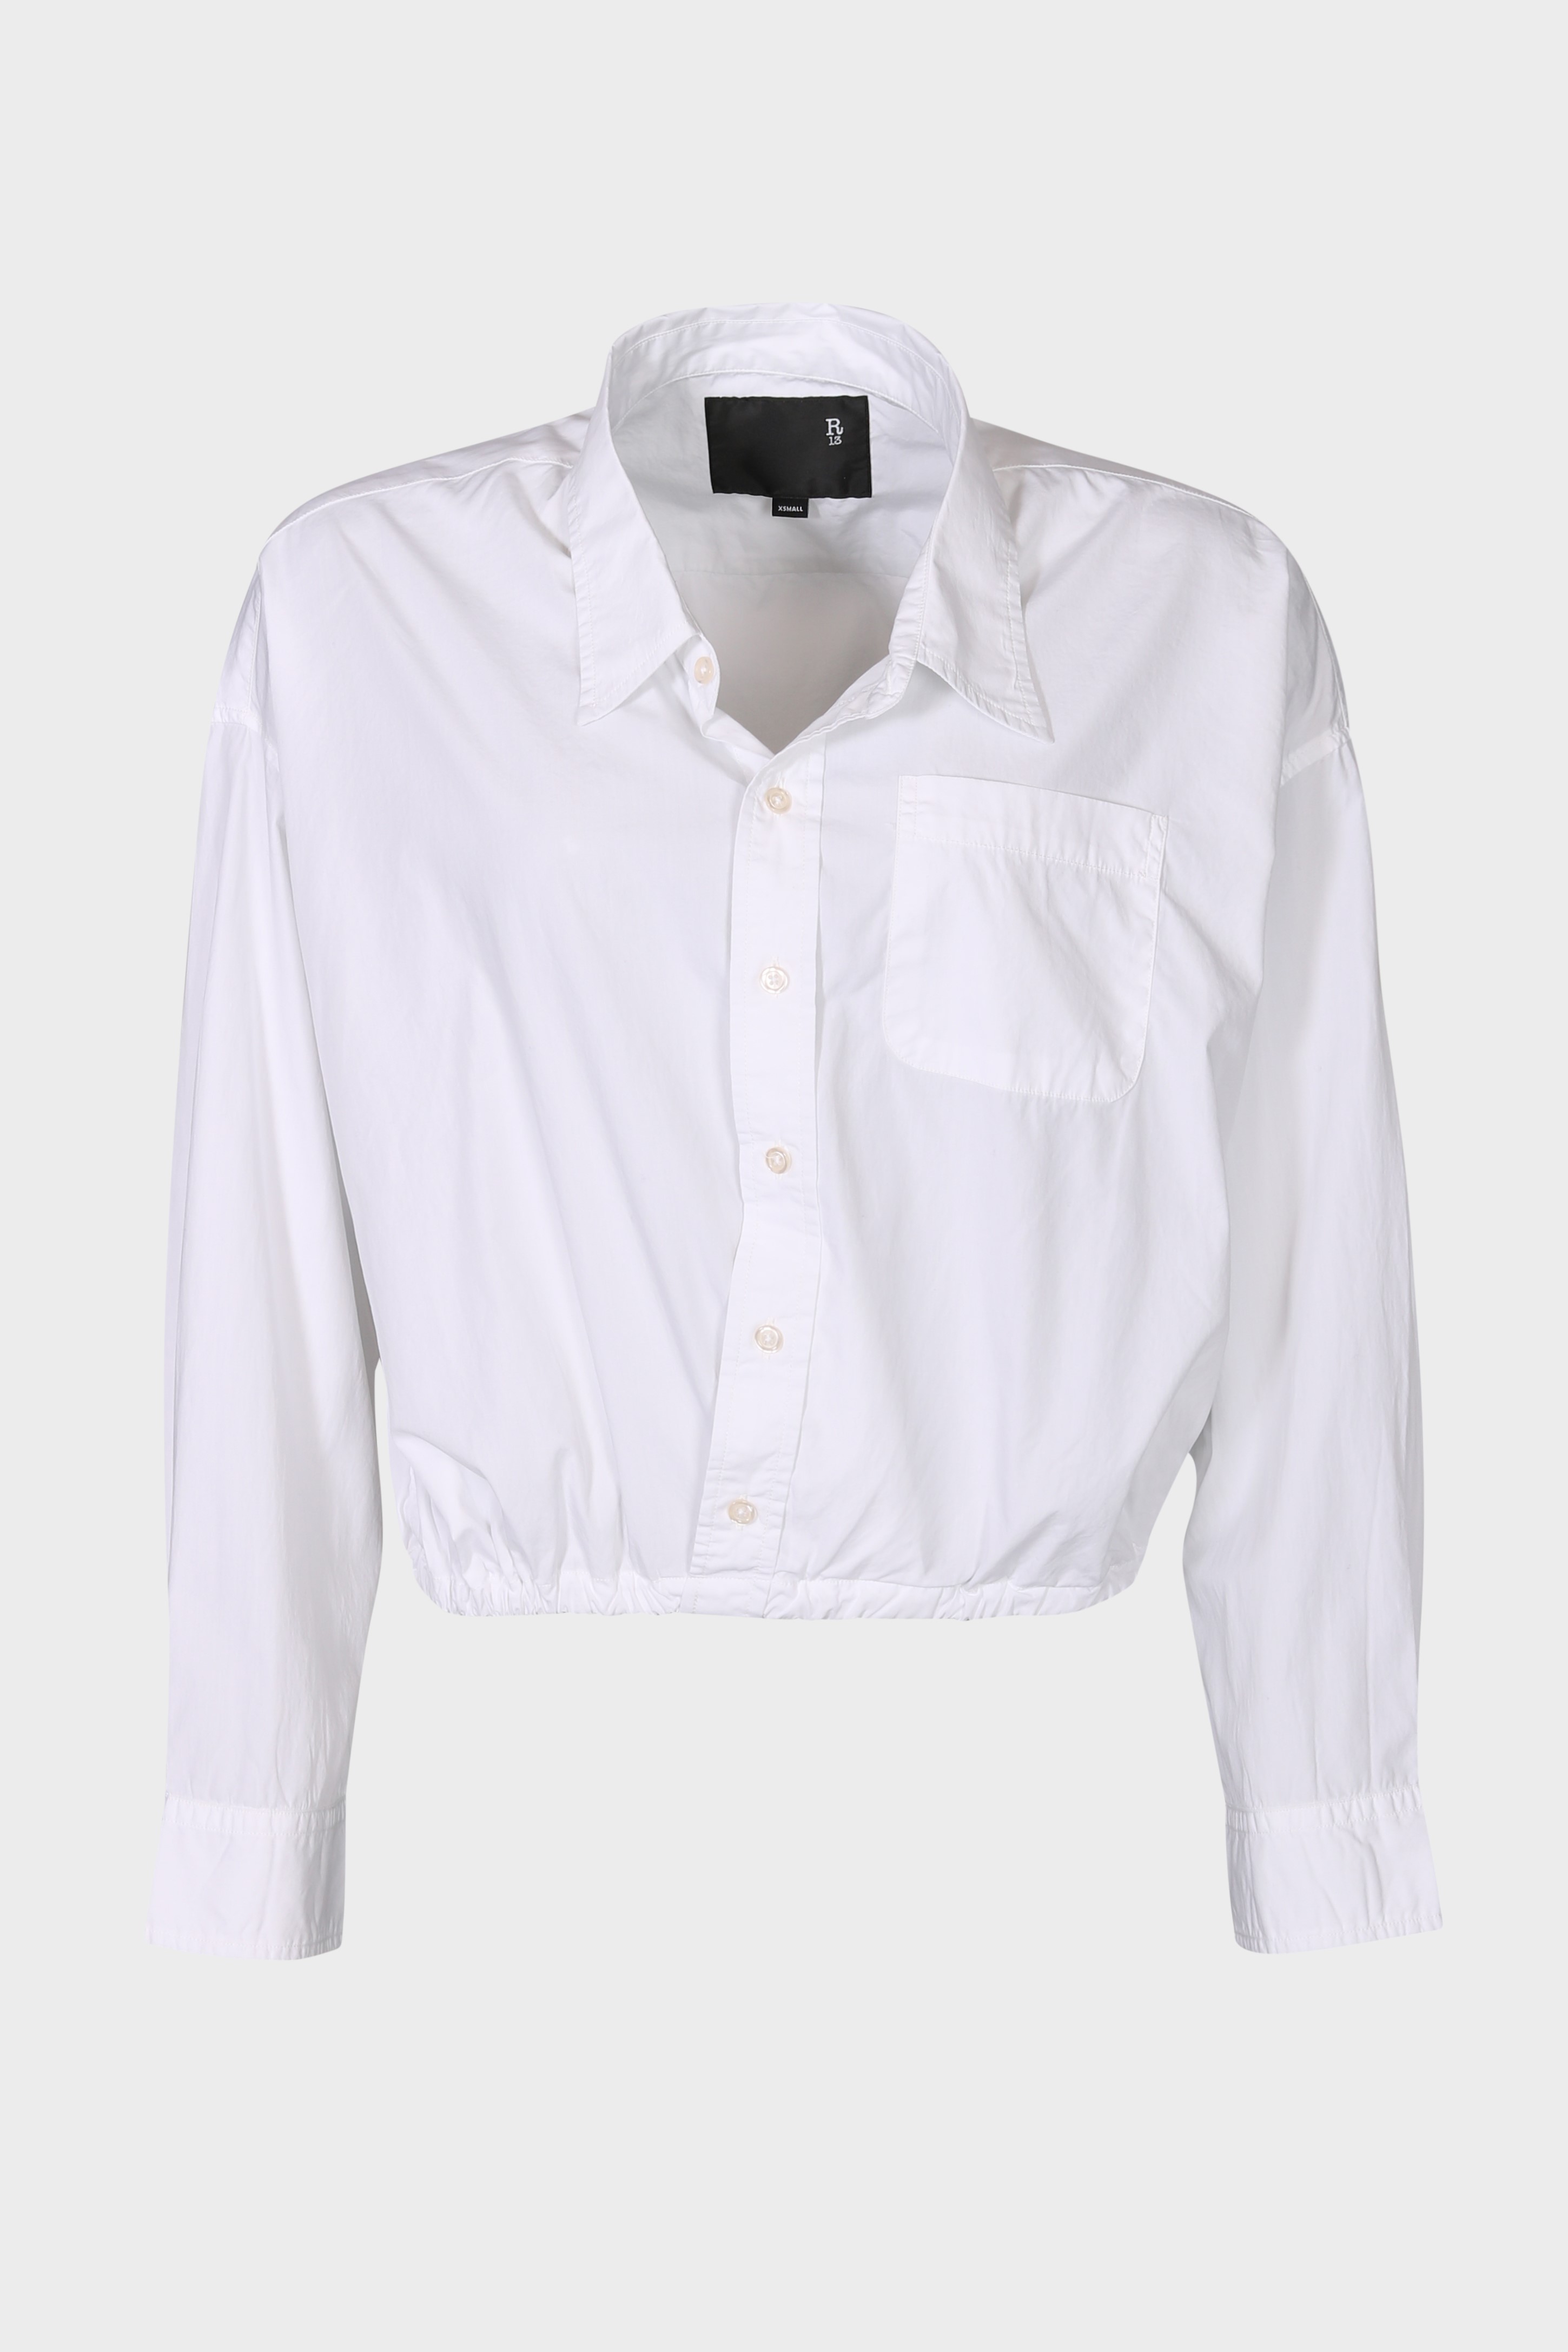 R13 Crossover Bubble Shirt in White XS